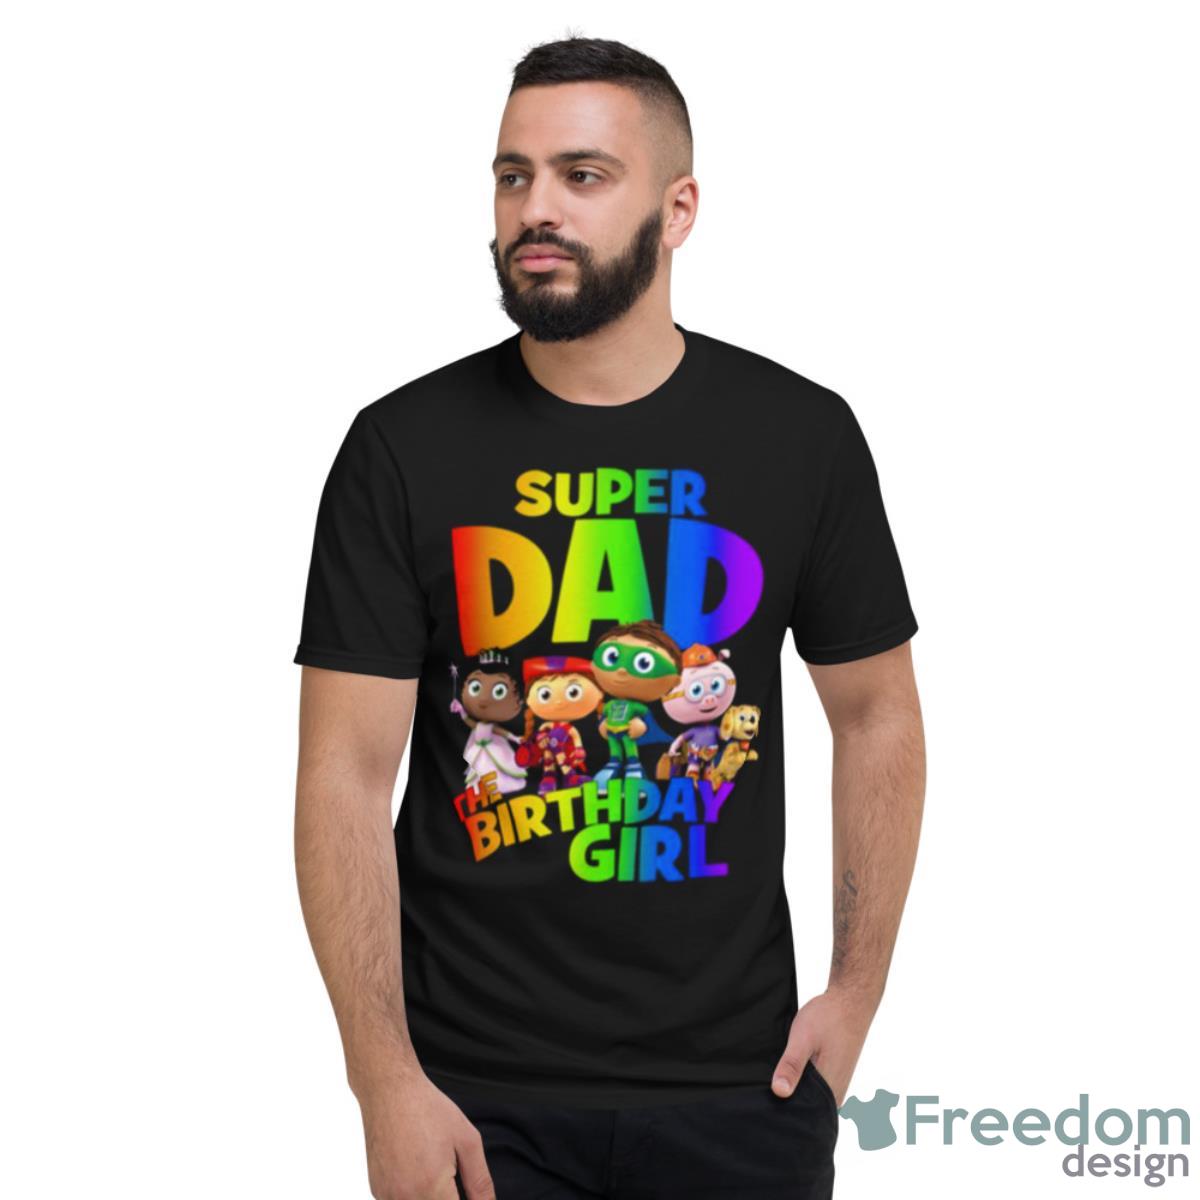 Super Dad The Birthday Girl Super Why shirt